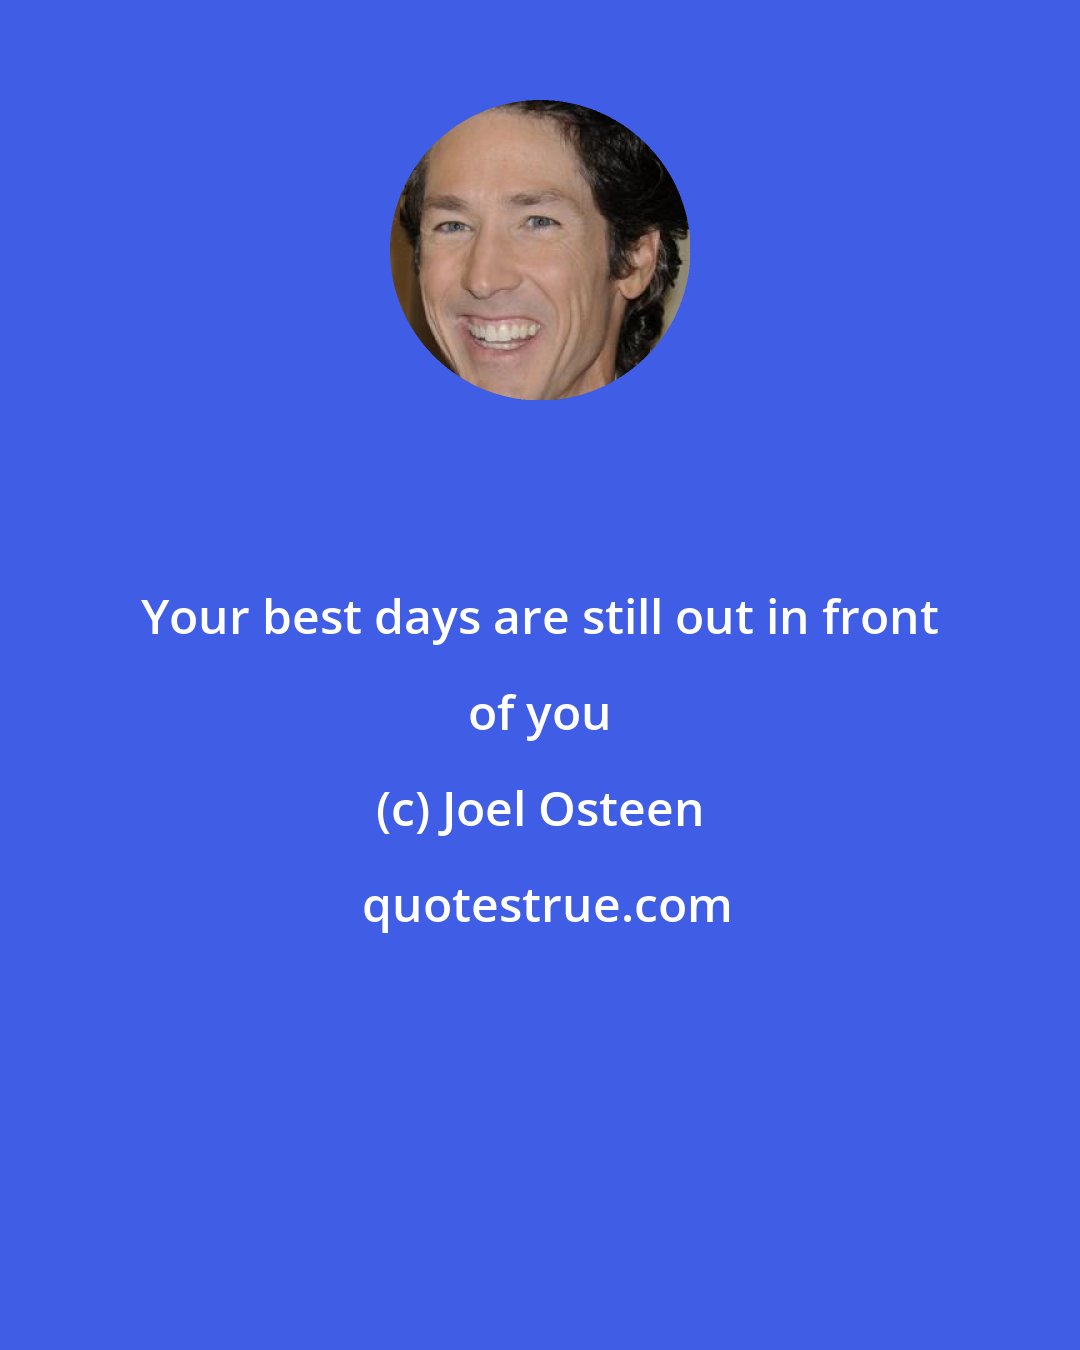 Joel Osteen: Your best days are still out in front of you